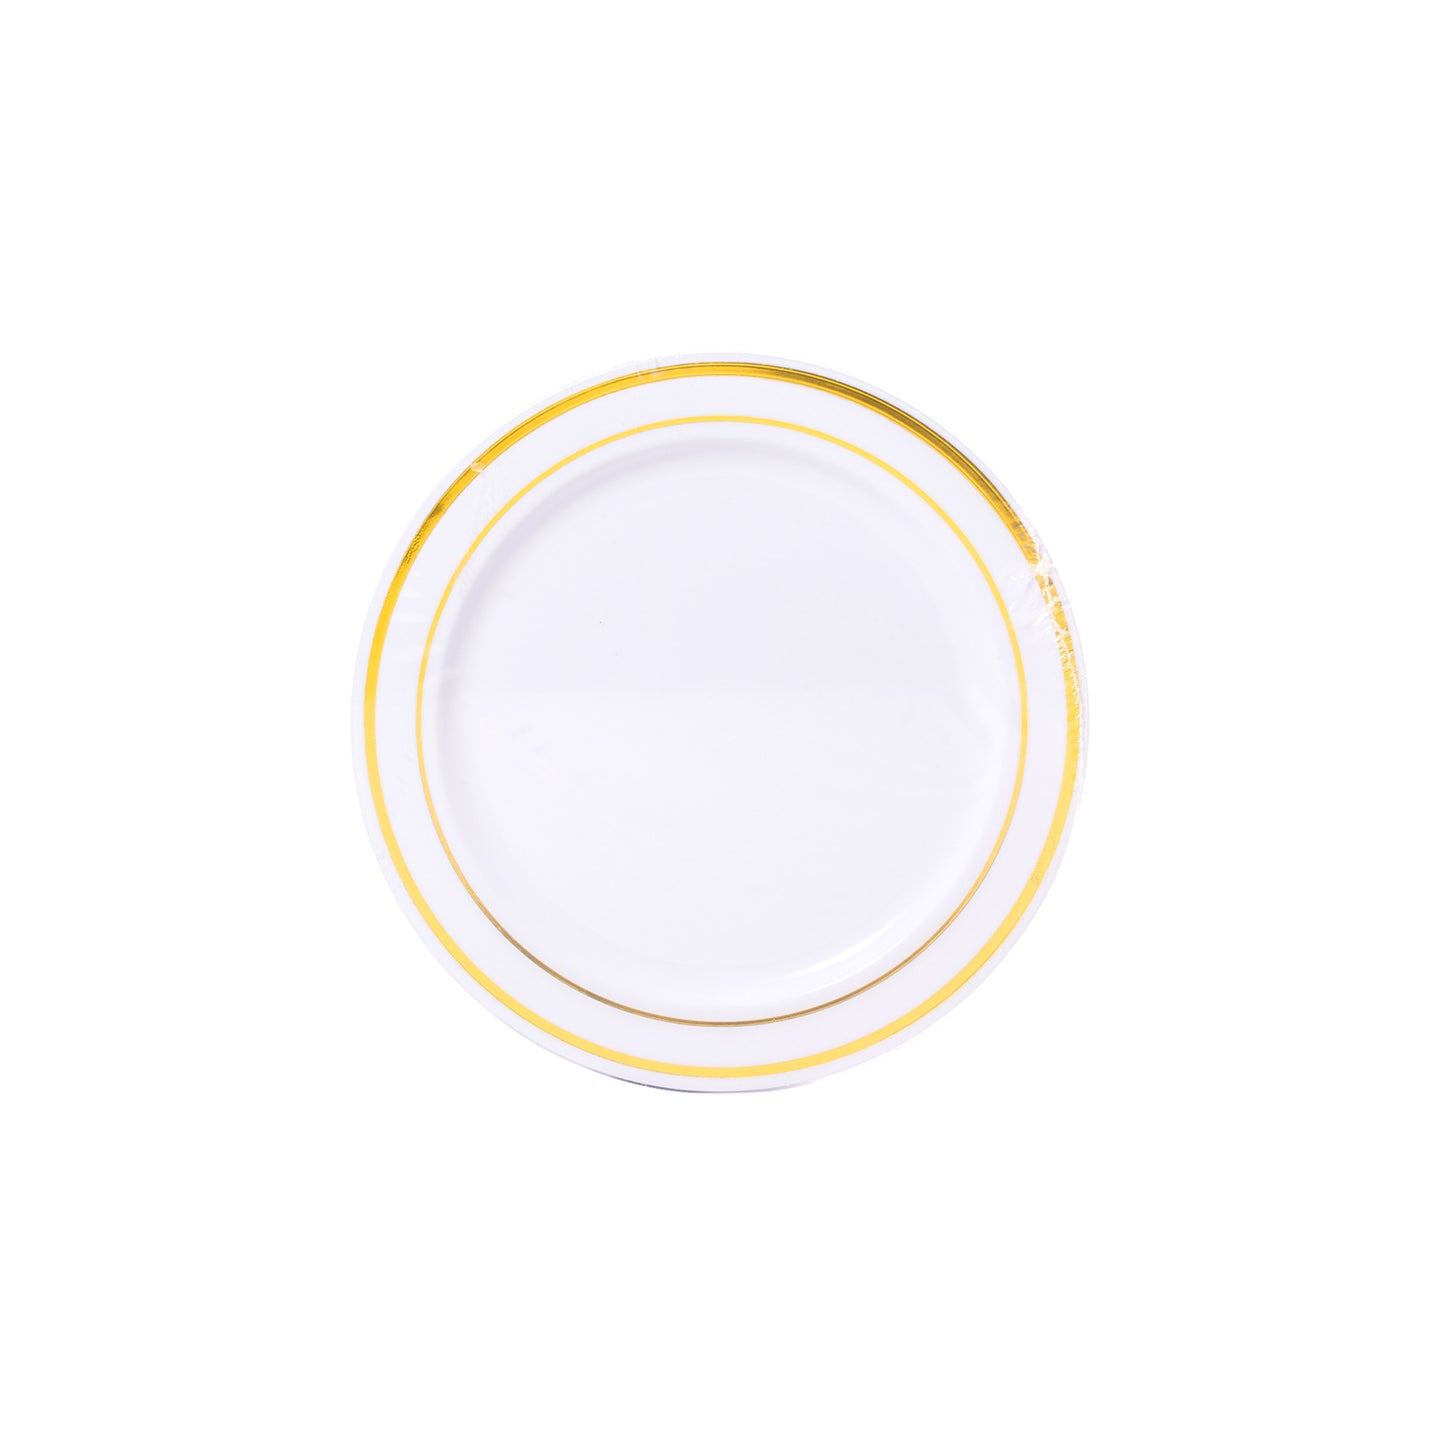 White with Gold Trim 6in Round Plastic Plates 12ct